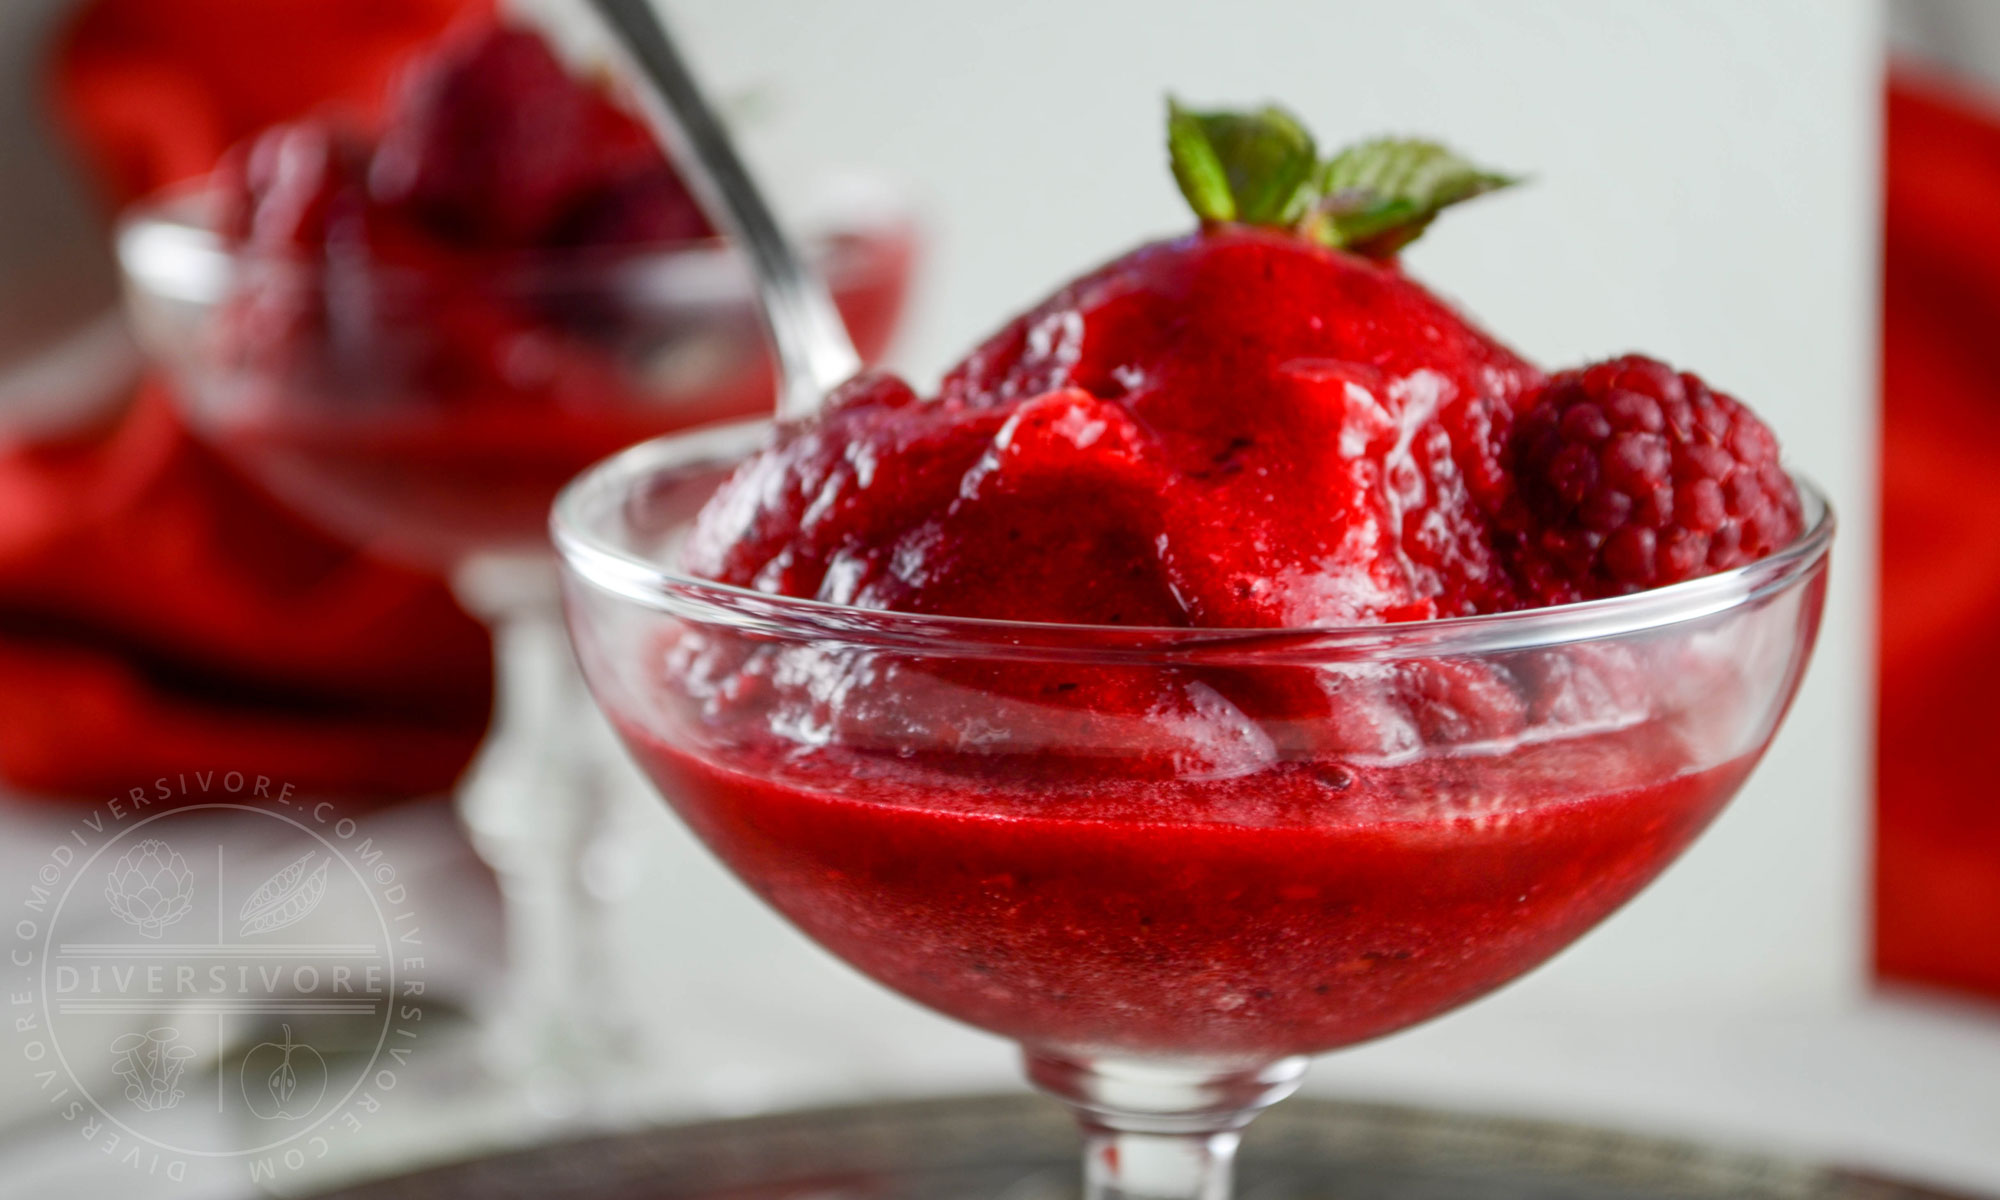 Featured image for “Raspberry Mint Sorbet”